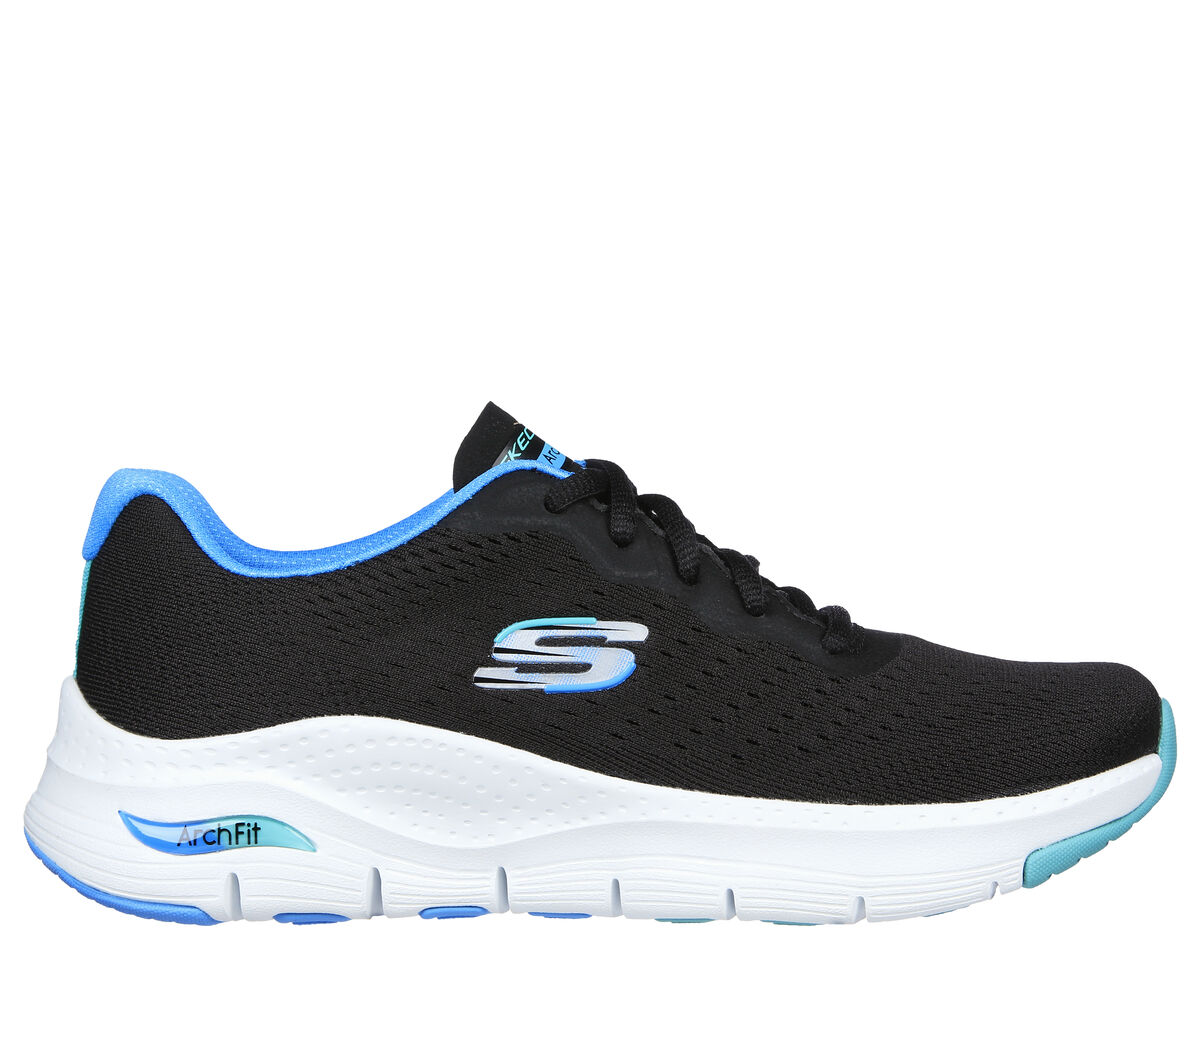 Skechers Arch Fit - Infinity Cool |